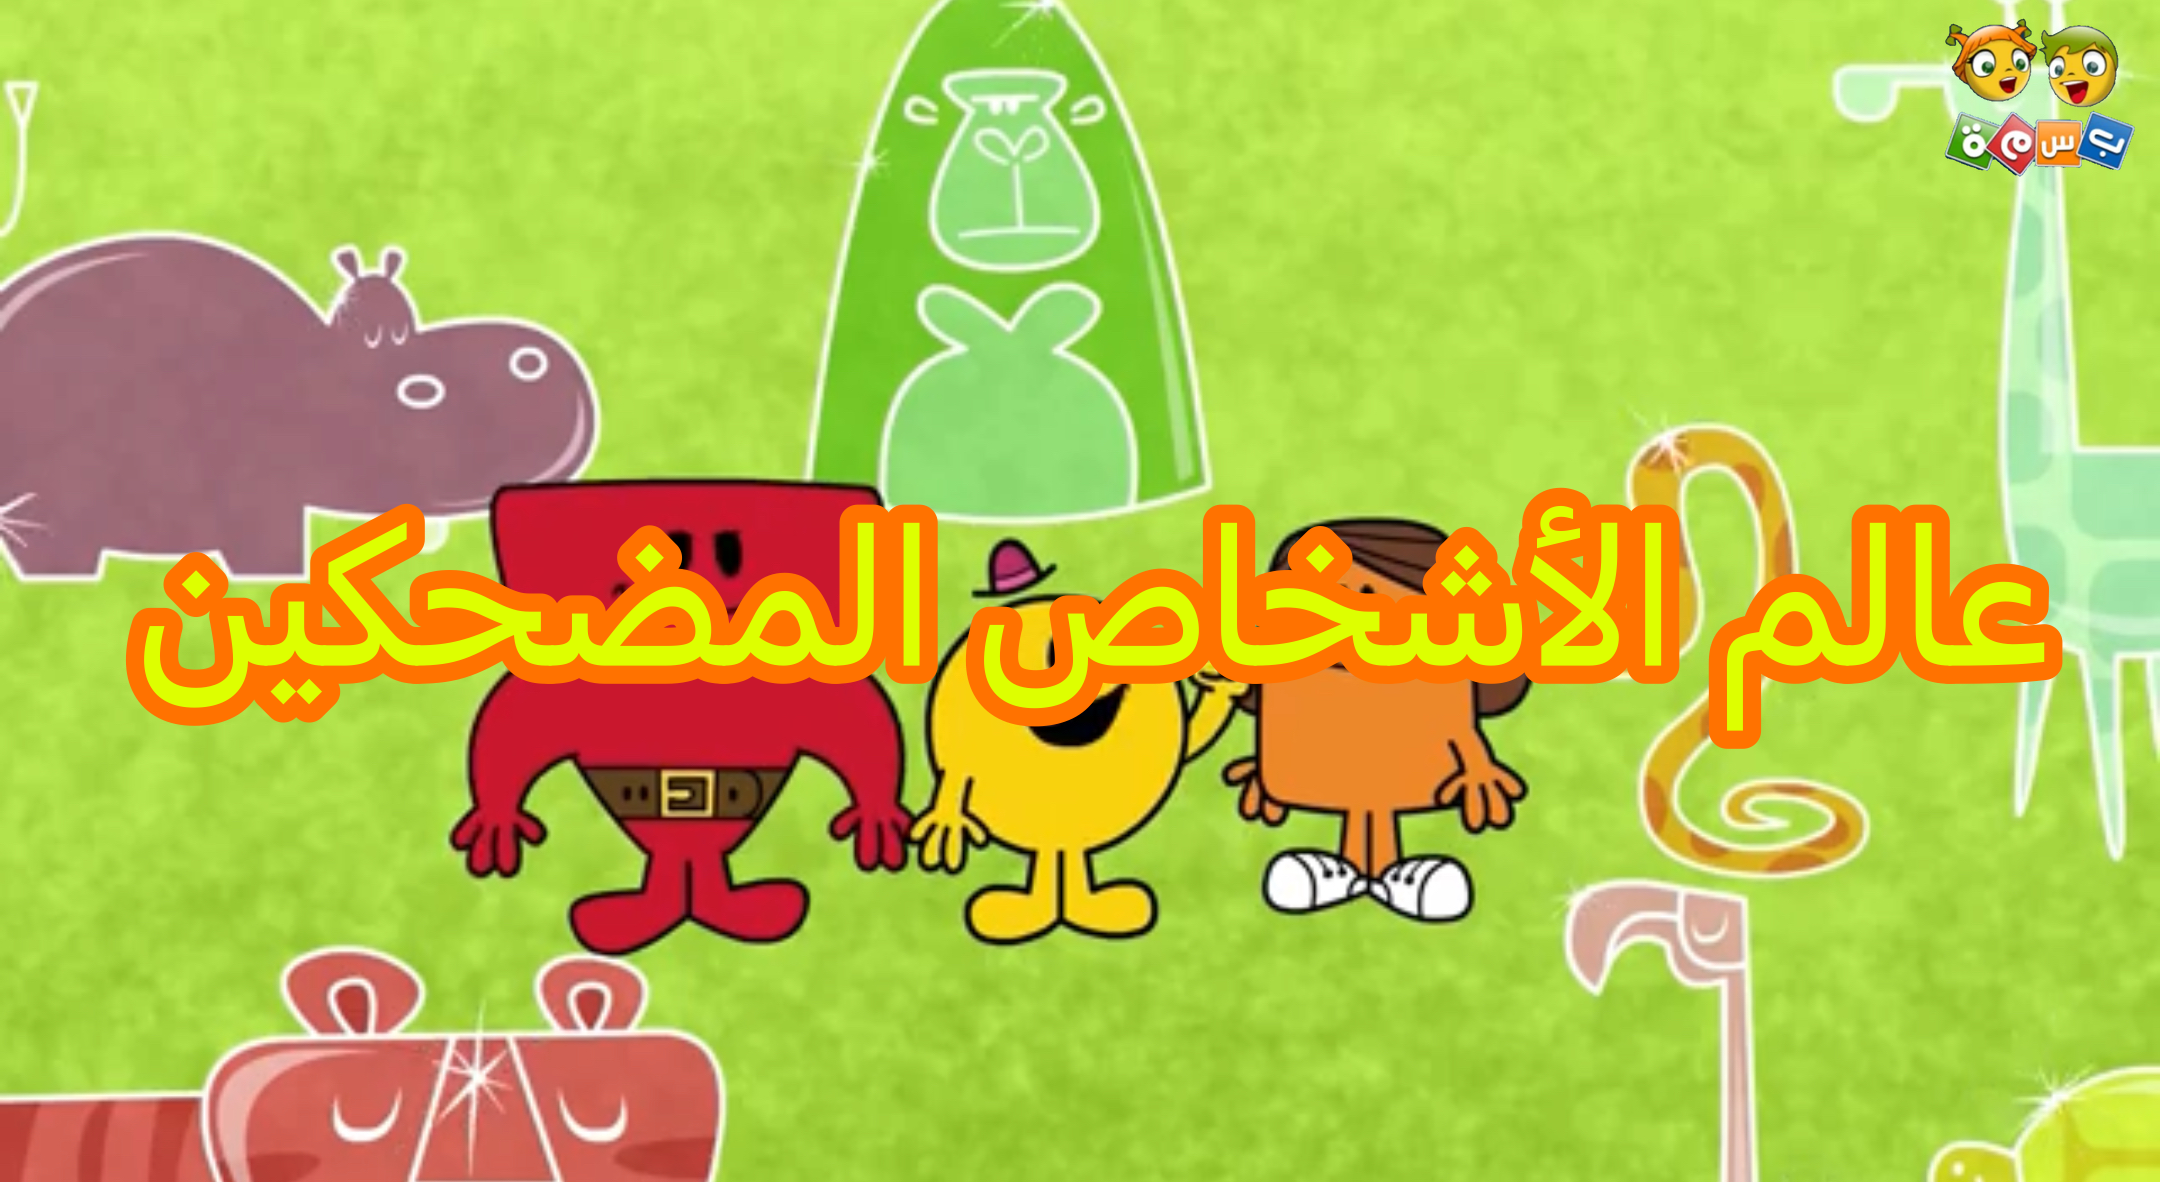 https://static.wikia.nocookie.net/iepfanon/images/e/ec/The_Mr._Men_and_Little_Miss_Show_logo_%28Basma_version%29.png/revision/latest?cb=20230818184922